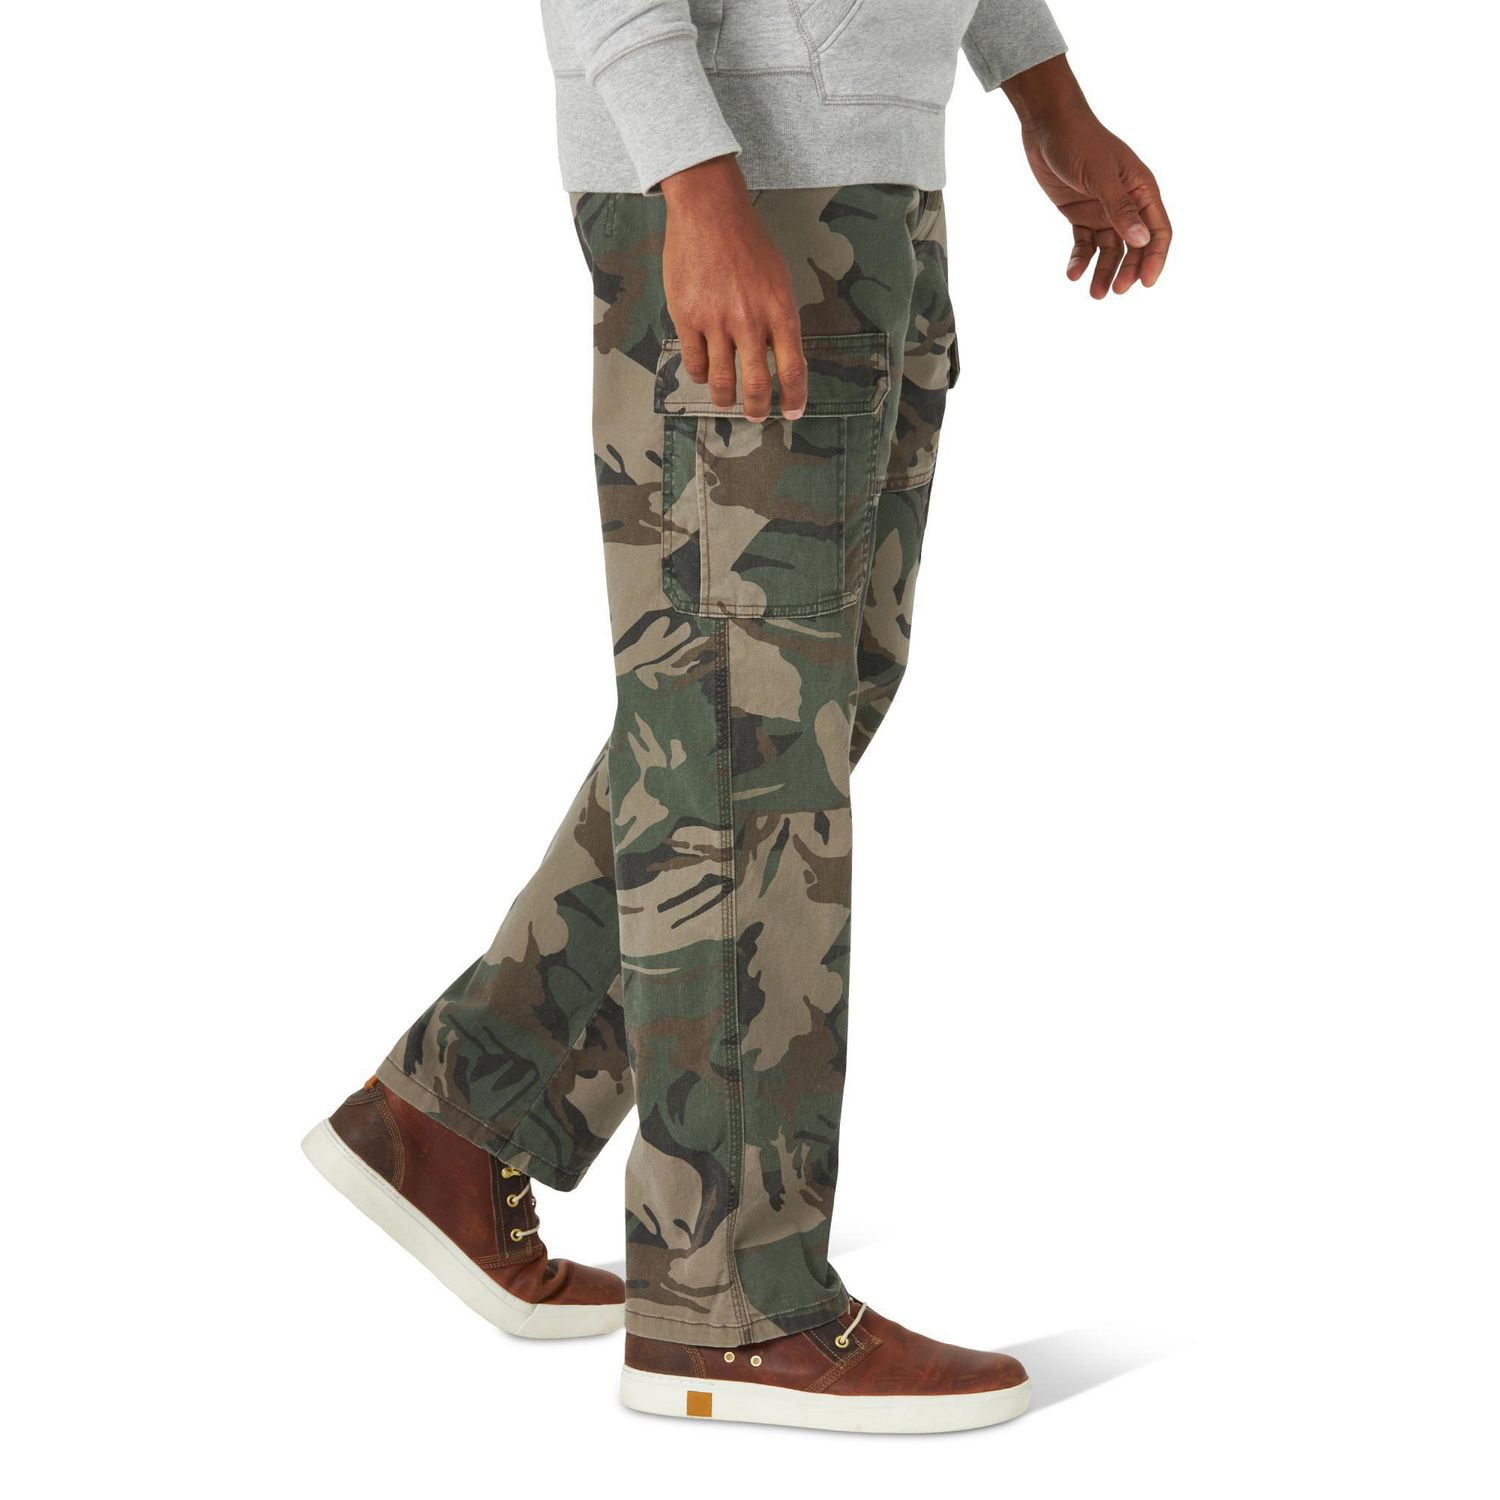 AKARMY Men's Relaxed Fit Cotton Casual Cargo Pant Combat Hiking Trousers :  : Clothing, Shoes & Accessories